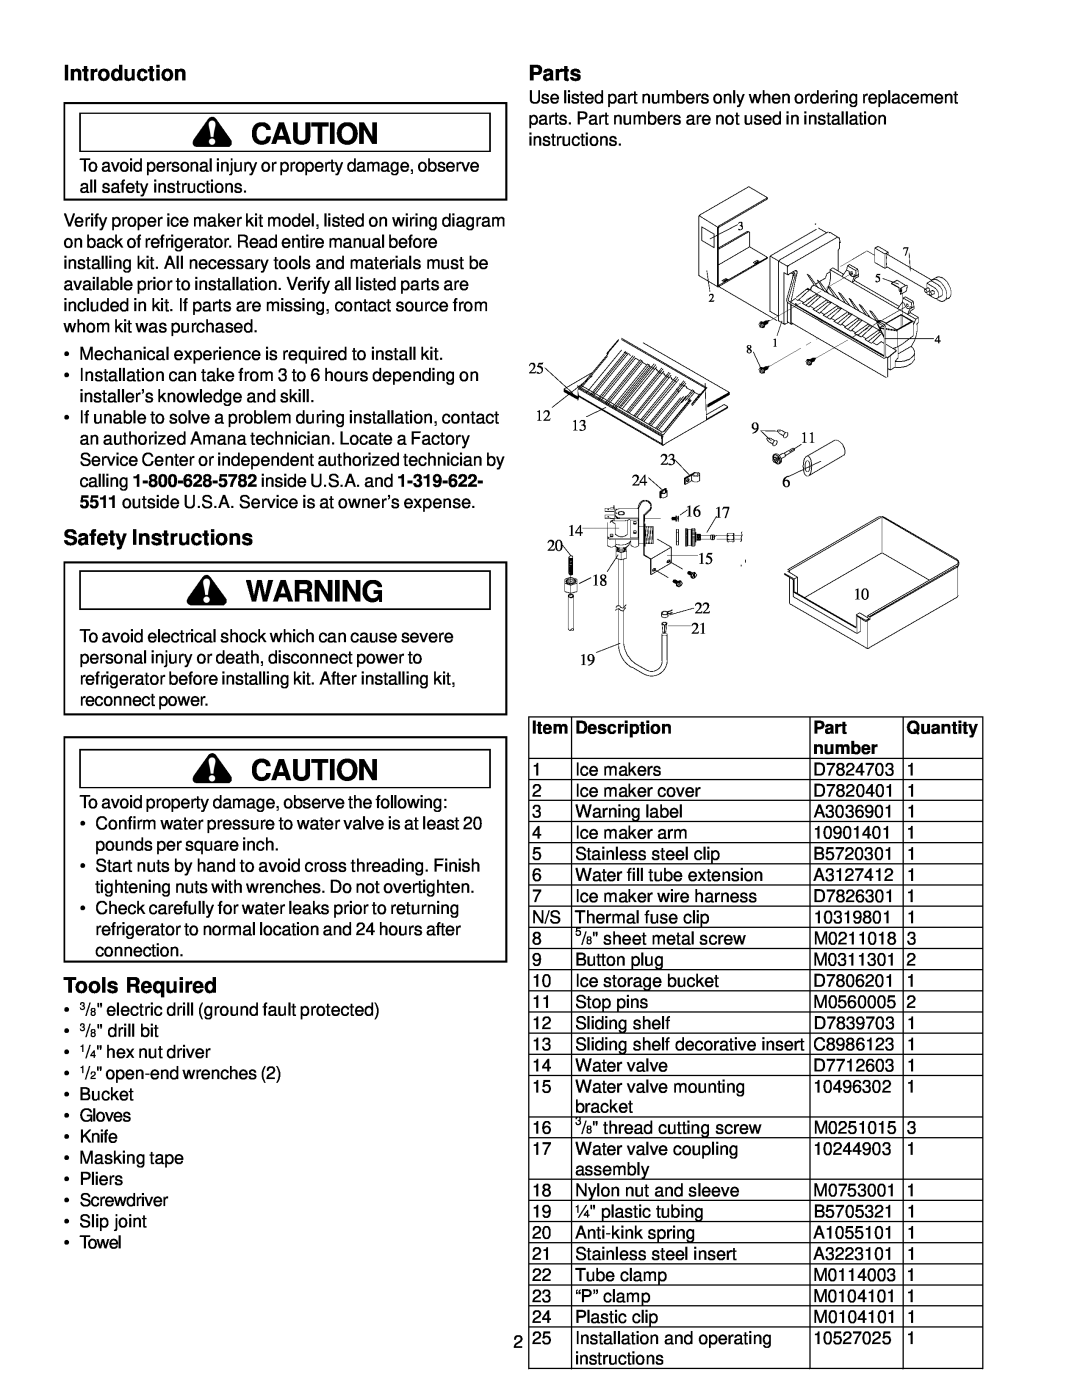 Whirlpool IC4 manual Introduction, Parts, Safety Instructions, Tools Required, Description, Quantity, number 